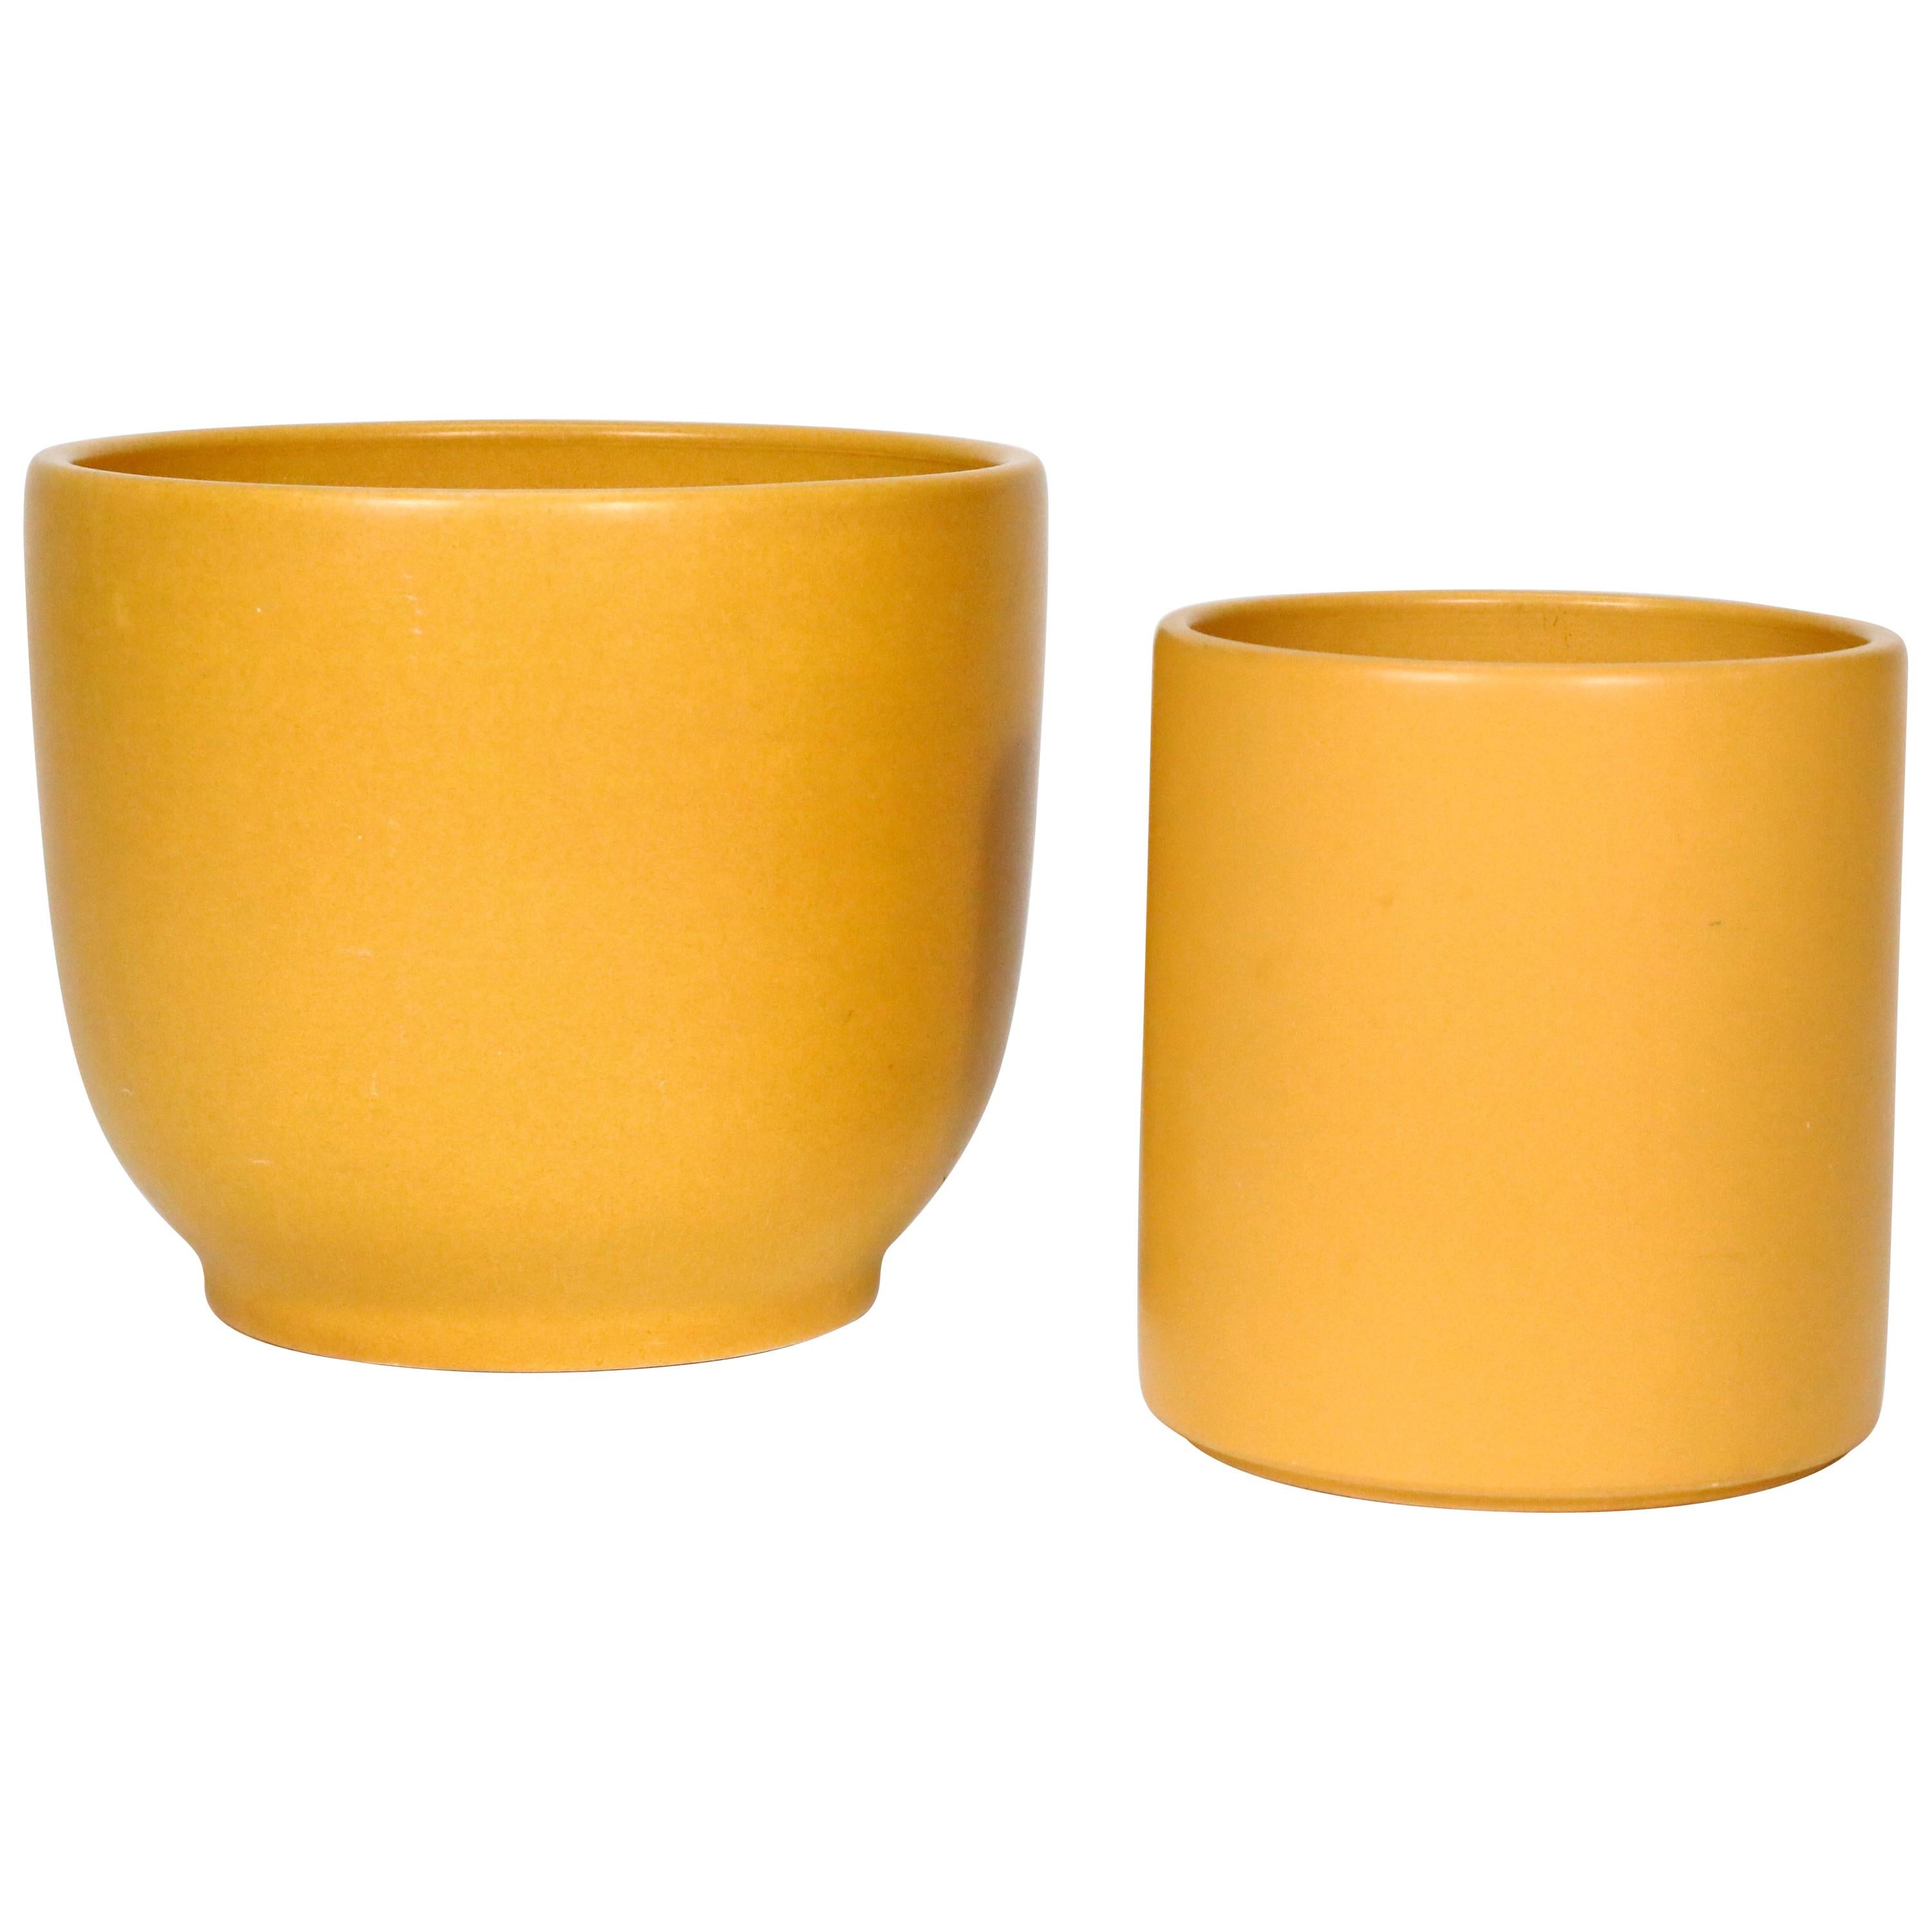 Pair of Midcentury Yellow Ochre Pots by Gainey Pottery